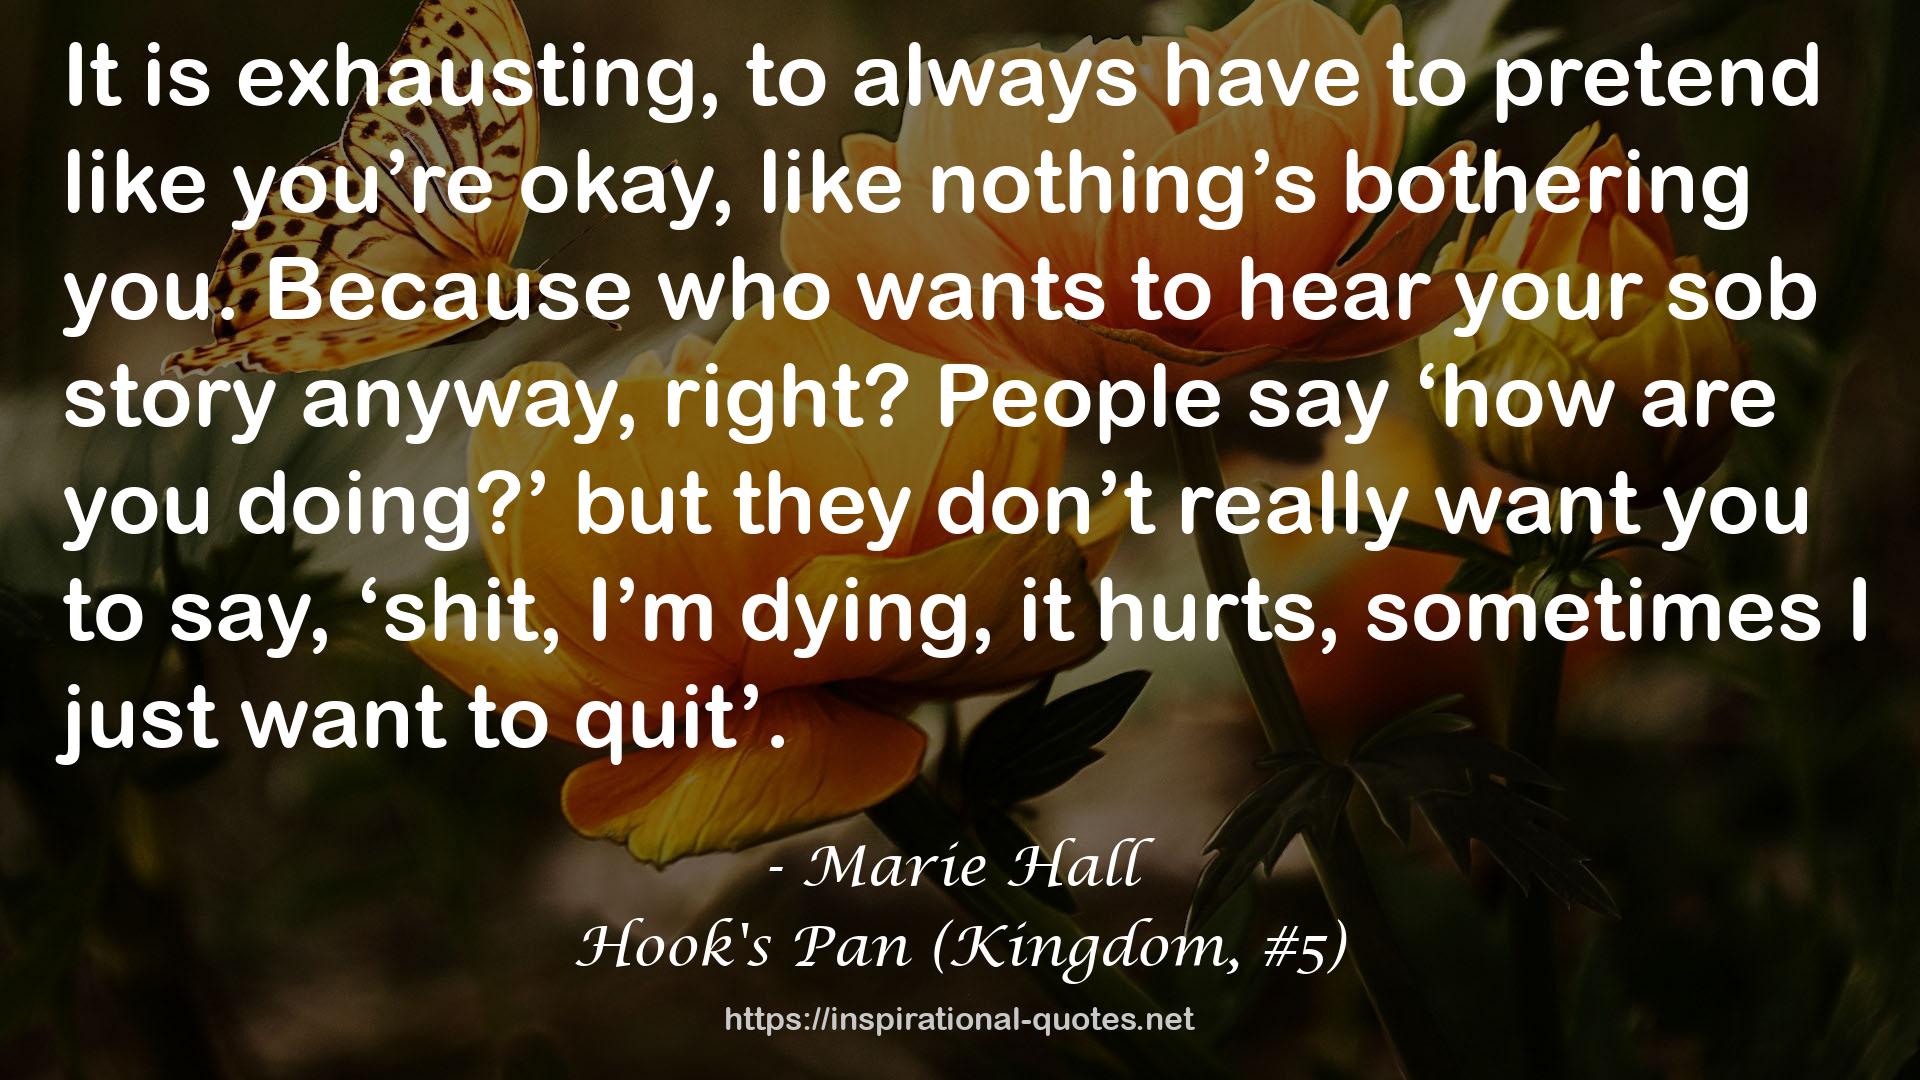 Hook's Pan (Kingdom, #5) QUOTES